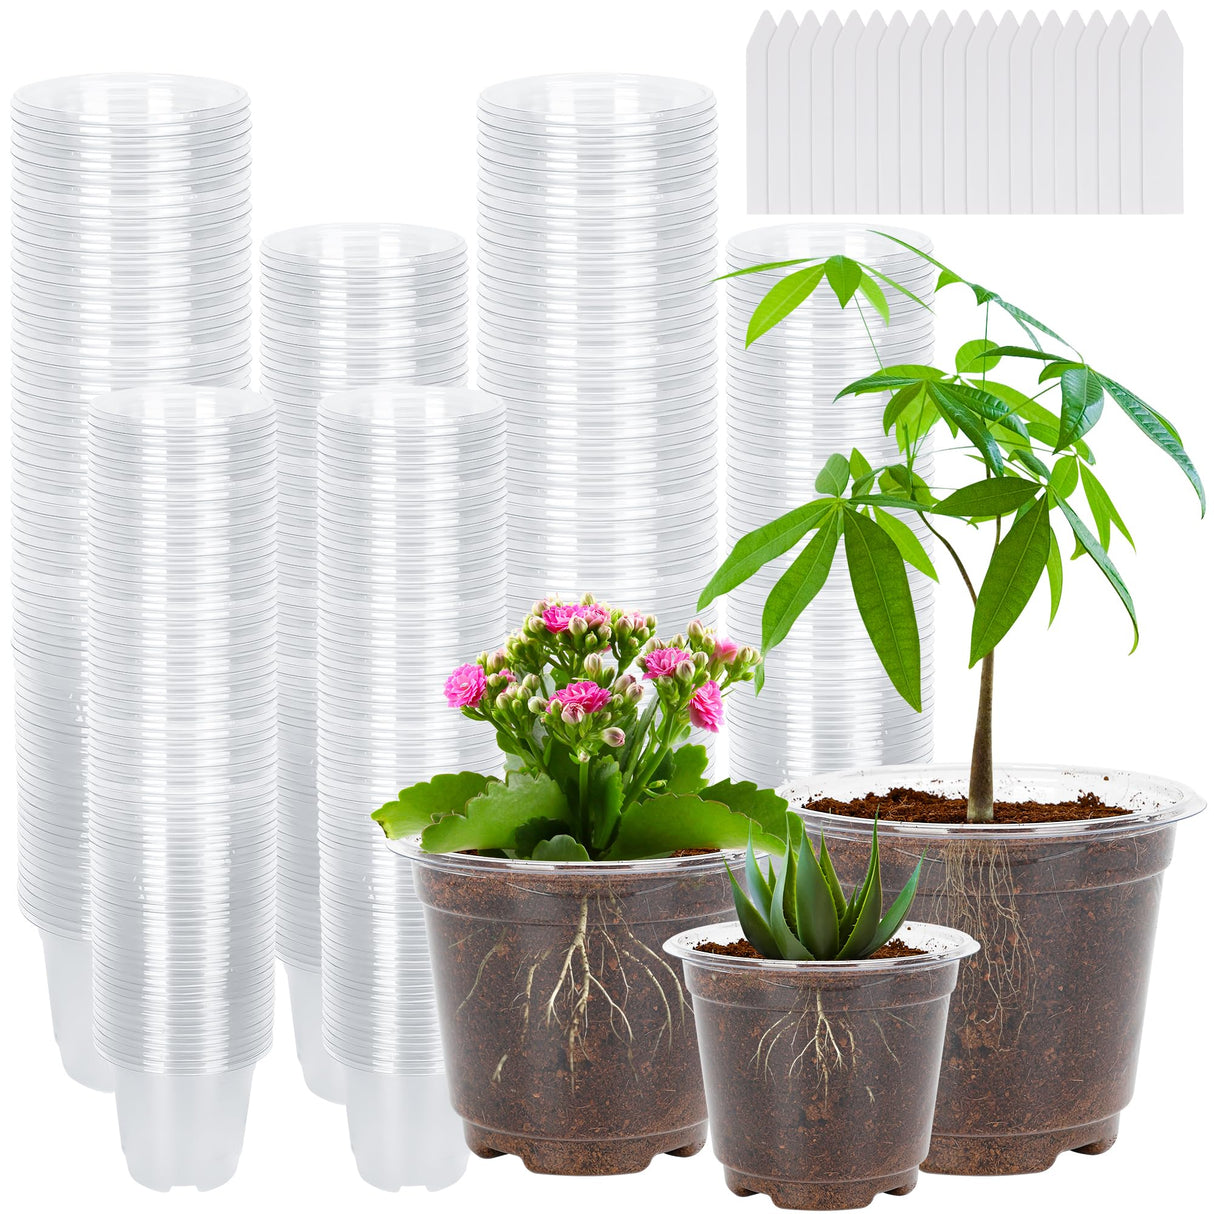 100 Pack 3.5/4/5 Inch Clear Nursery Pots, Transparent Plant Pots, Plastic Seedling Pots with Drainage Holes Seed Starter Planter Garden Pots with 100 Plant Labels for Vegetable Flower Plants